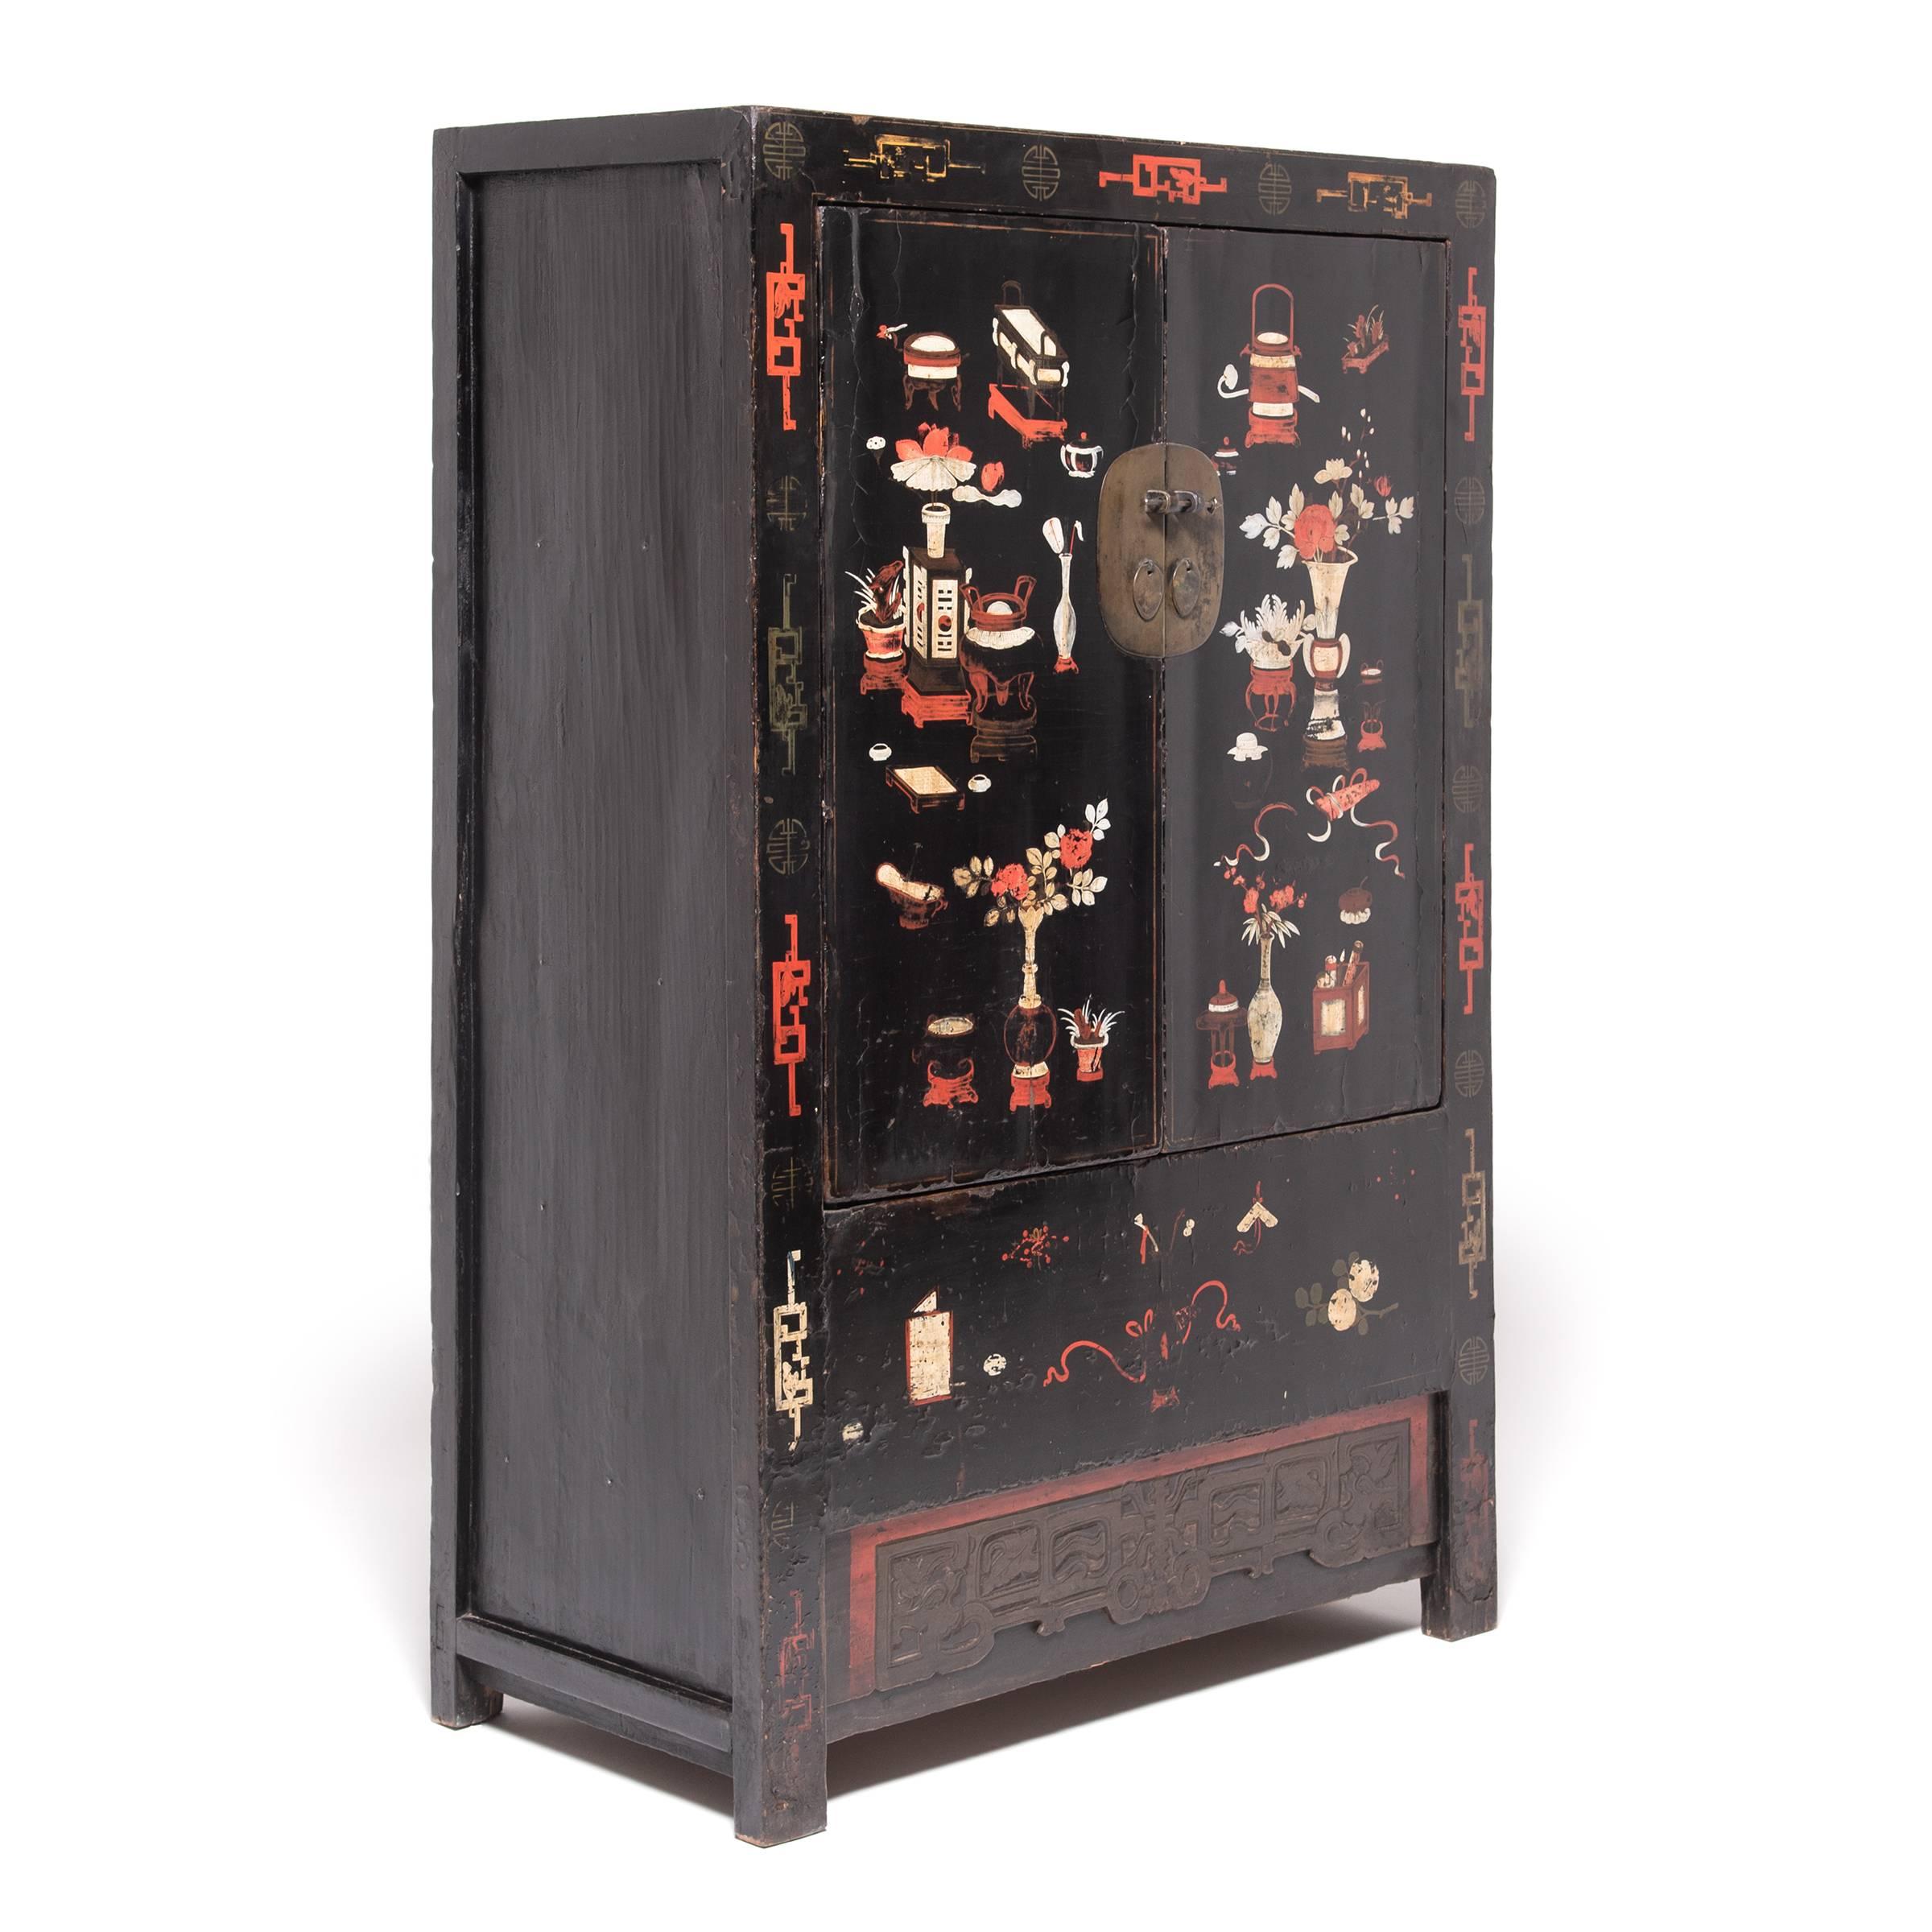 19th Century Chinese Painted Scholars' Cabinet, c. 1850